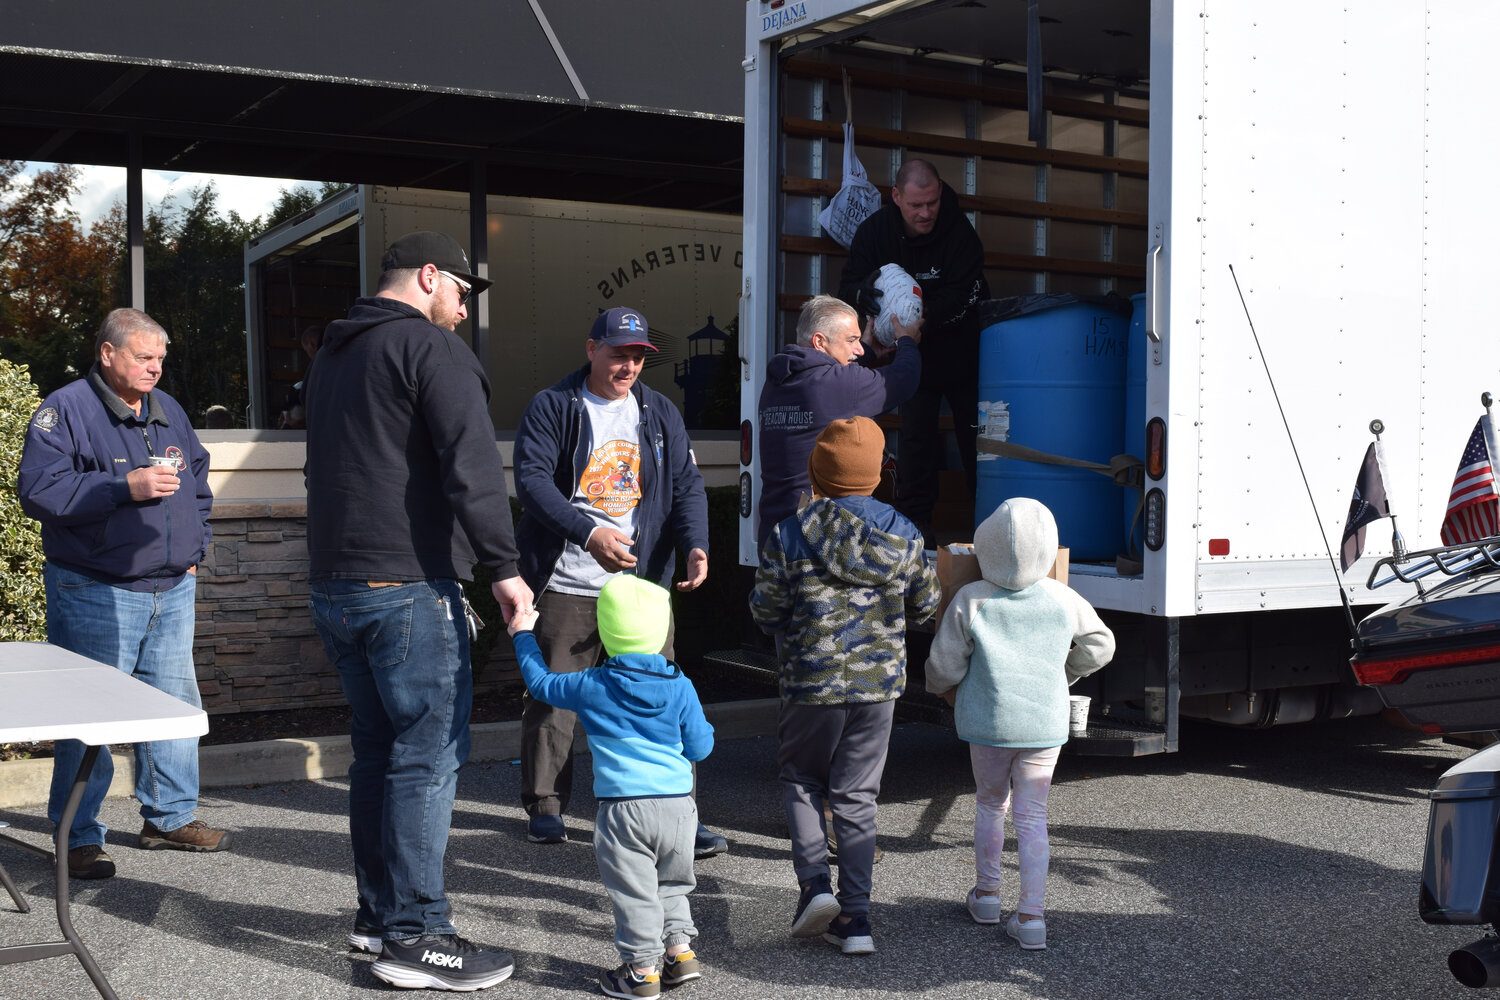 This past weekend, the East Meadow community showed its support for veterans. At the Green Turtle, Fighters of Fire Motorcycle Club and the American Legion Post 1082 hosted a food and turkey drive for homeless veterans.